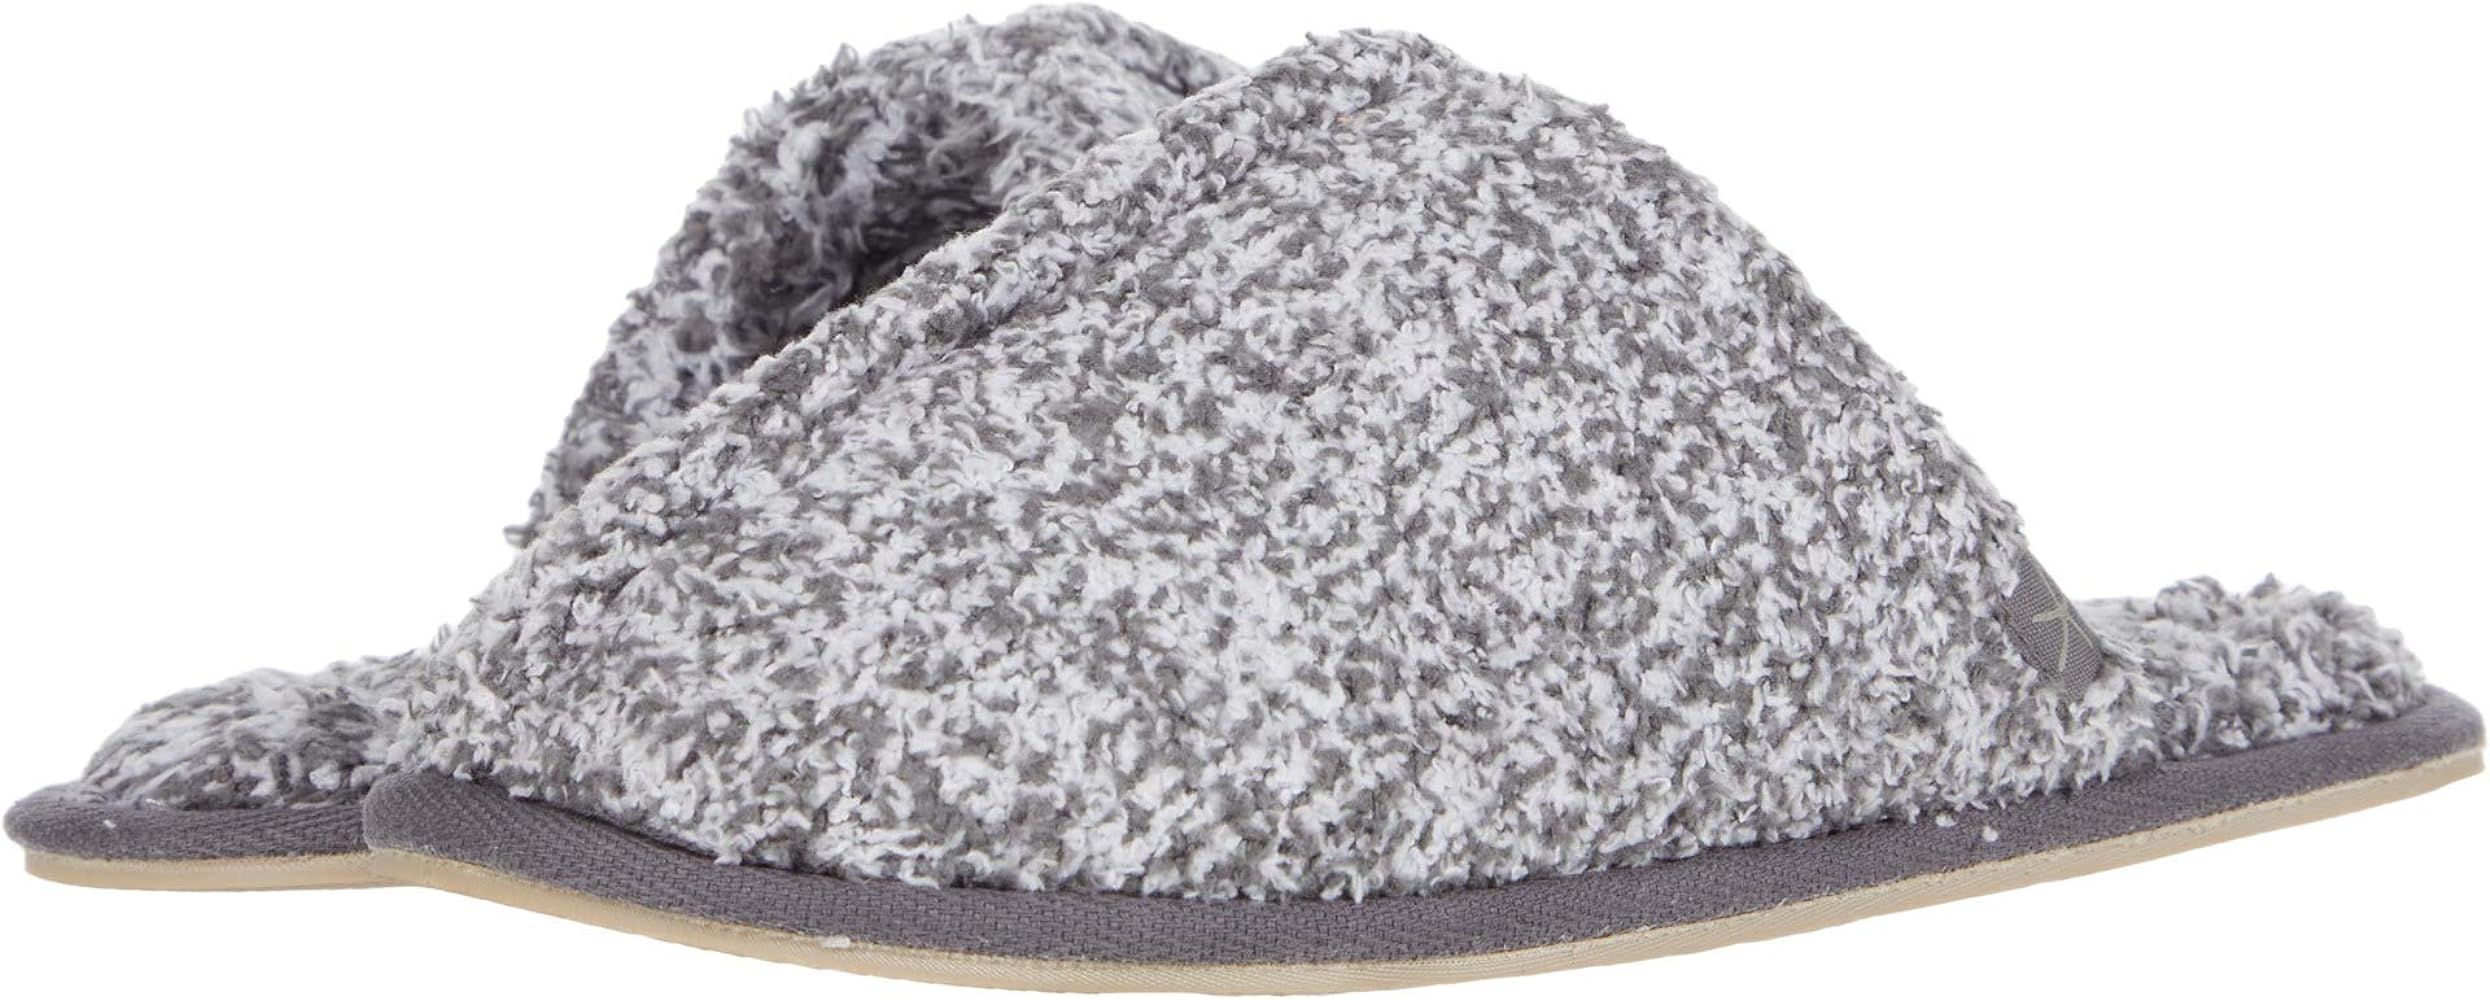 Barefoot Dreams CozyChic Cozy Slippers for Women, Open-Back House Slippers | Amazon (US)